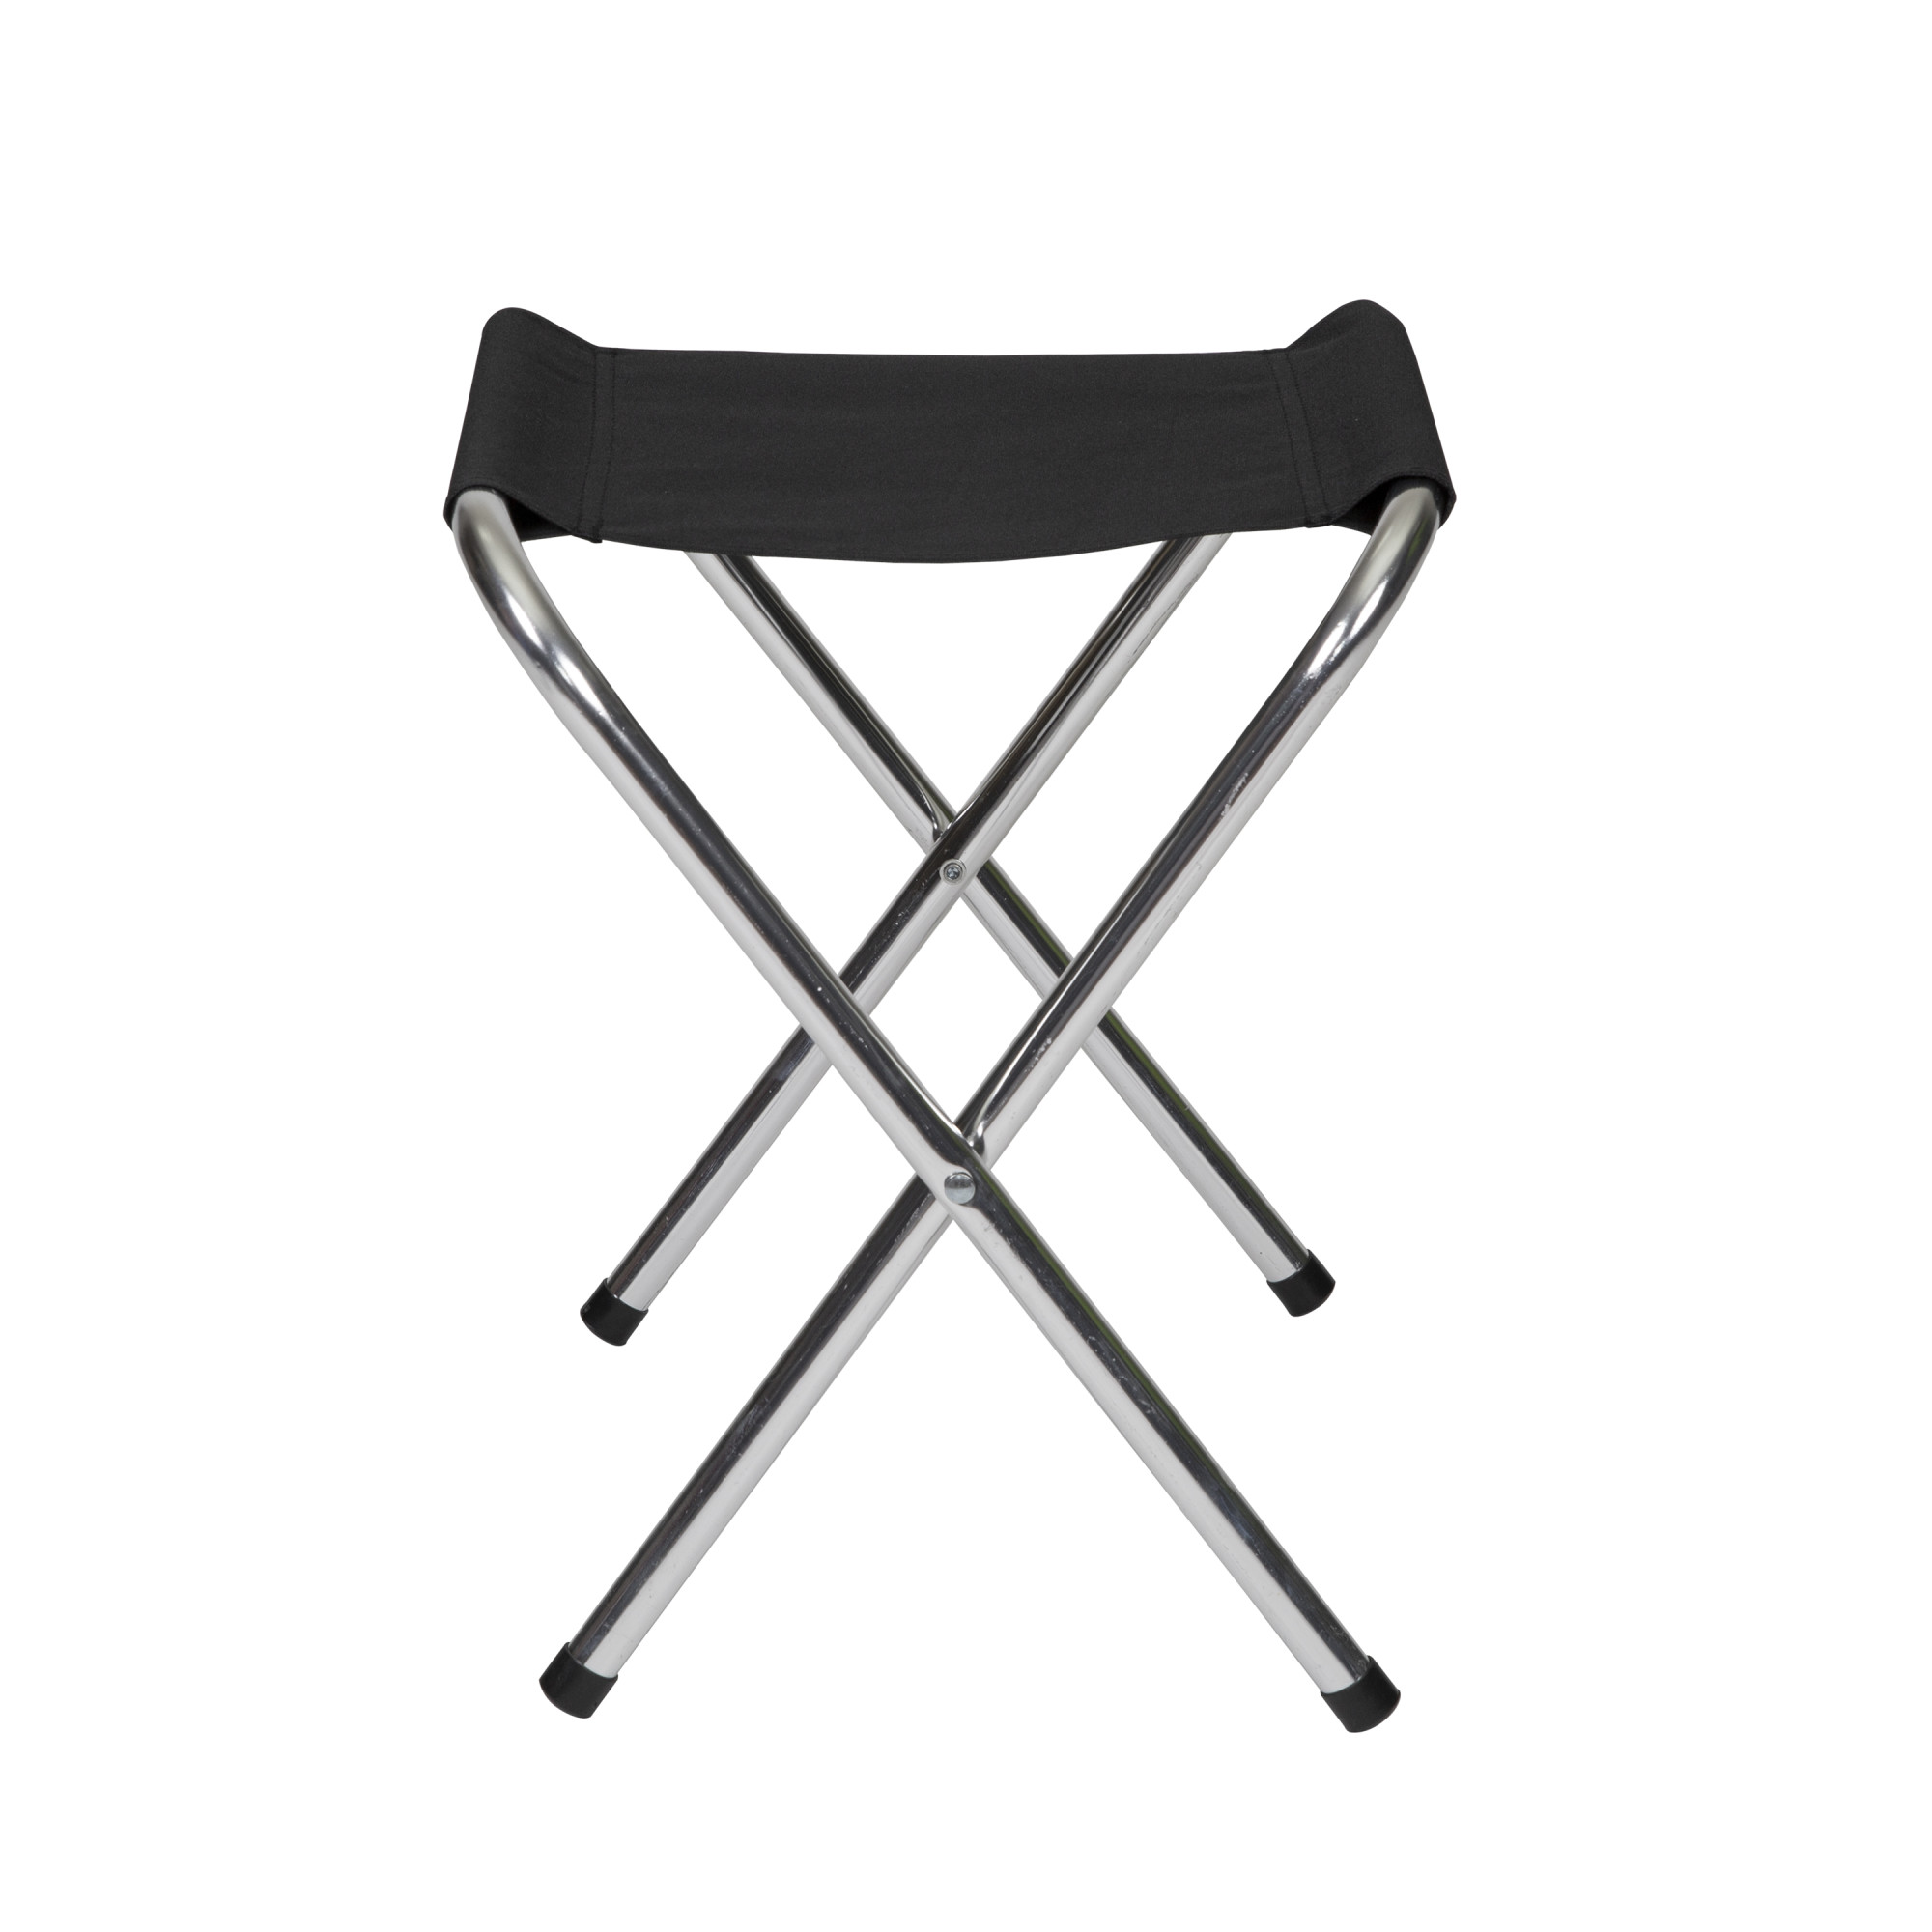 Stansport Camping Table Black Polyester 15.7" L x 12.8" W x 15" H - image 1 of 11